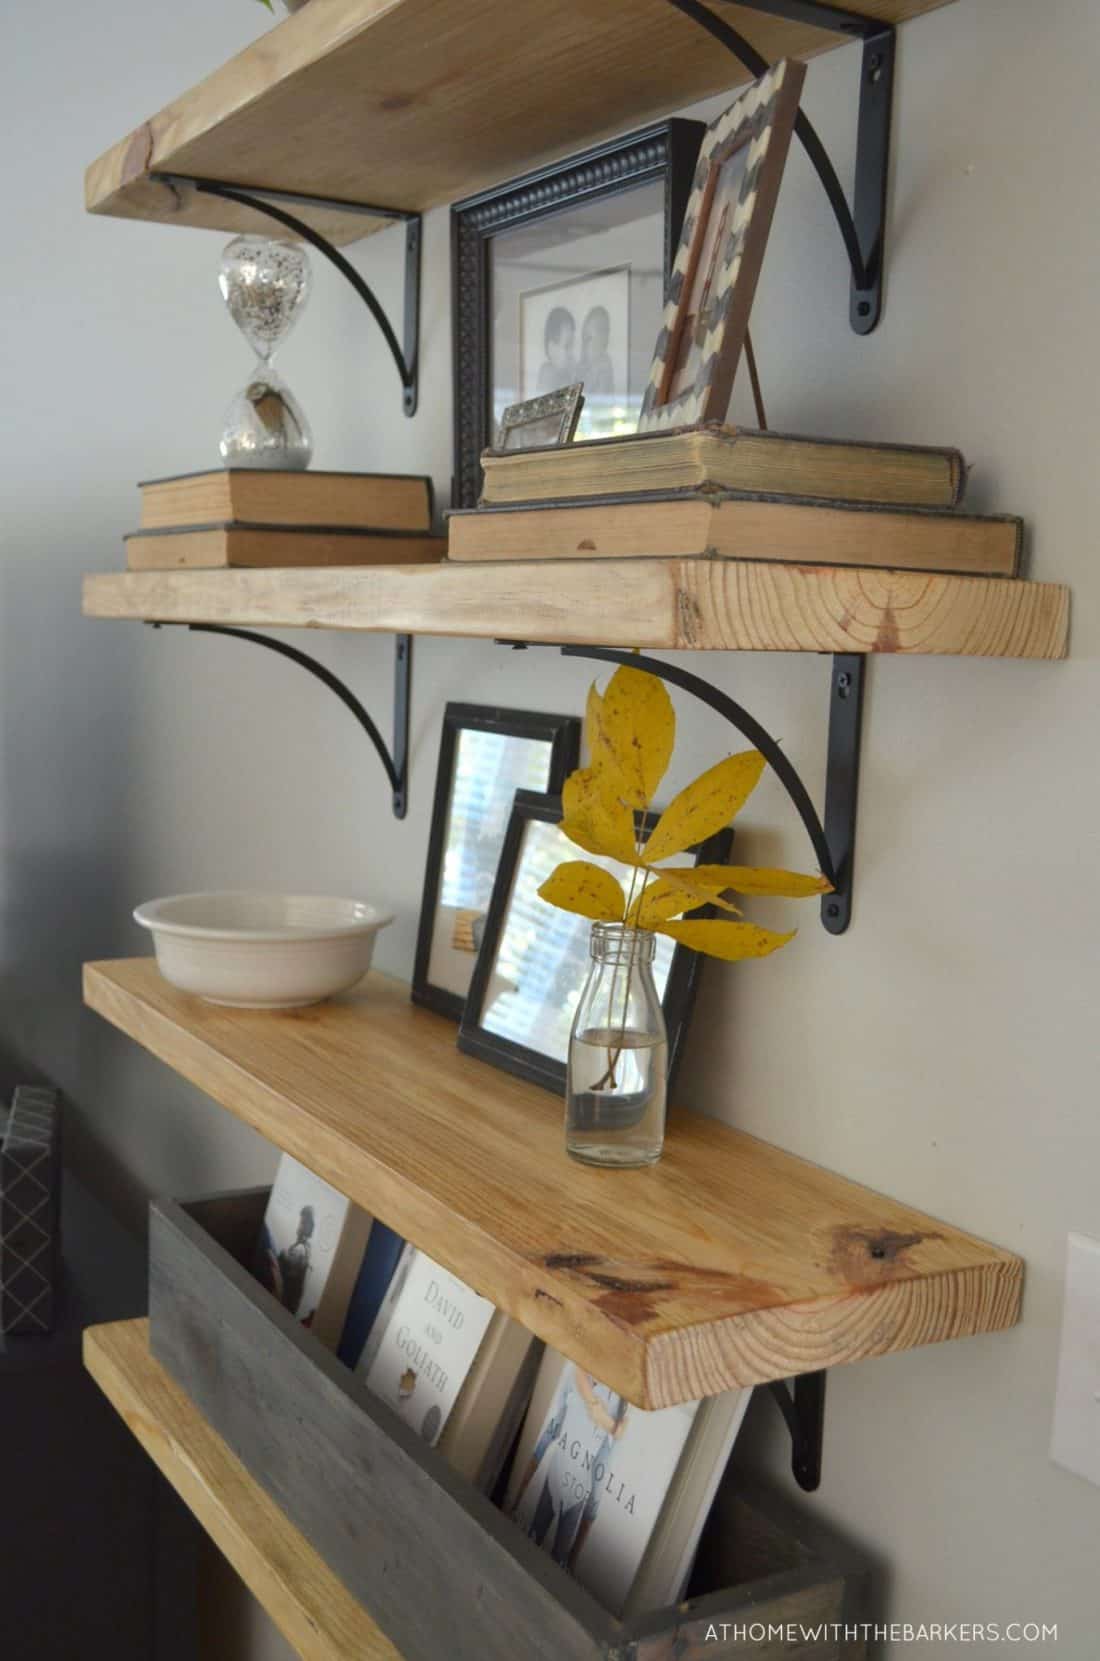 DIY Rustic Wood Shelves - At Home with The Barkers